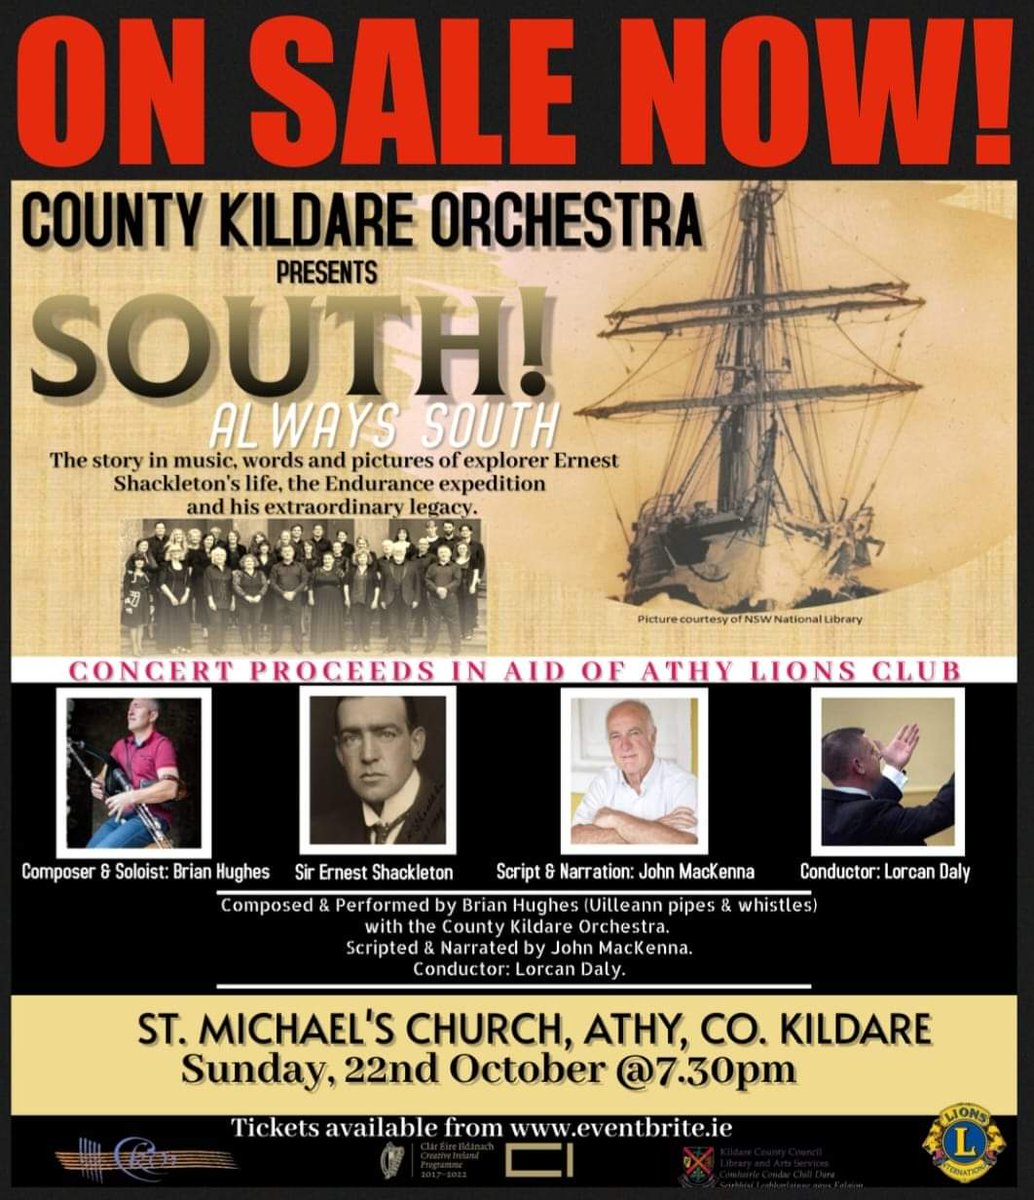 SOUTH!Always South is coming to ATHY! As featured on @RTENationwide! Tickets from Winkles Newsagents or link here 👇 eventbrite.com/e/south-always… @ArtsInCoKildare @leinsleadernews @KildareCoCo @ShackletonMus @lionsclubsIrl @AthyLions #kildare #athy #shackleton #orchestra #music